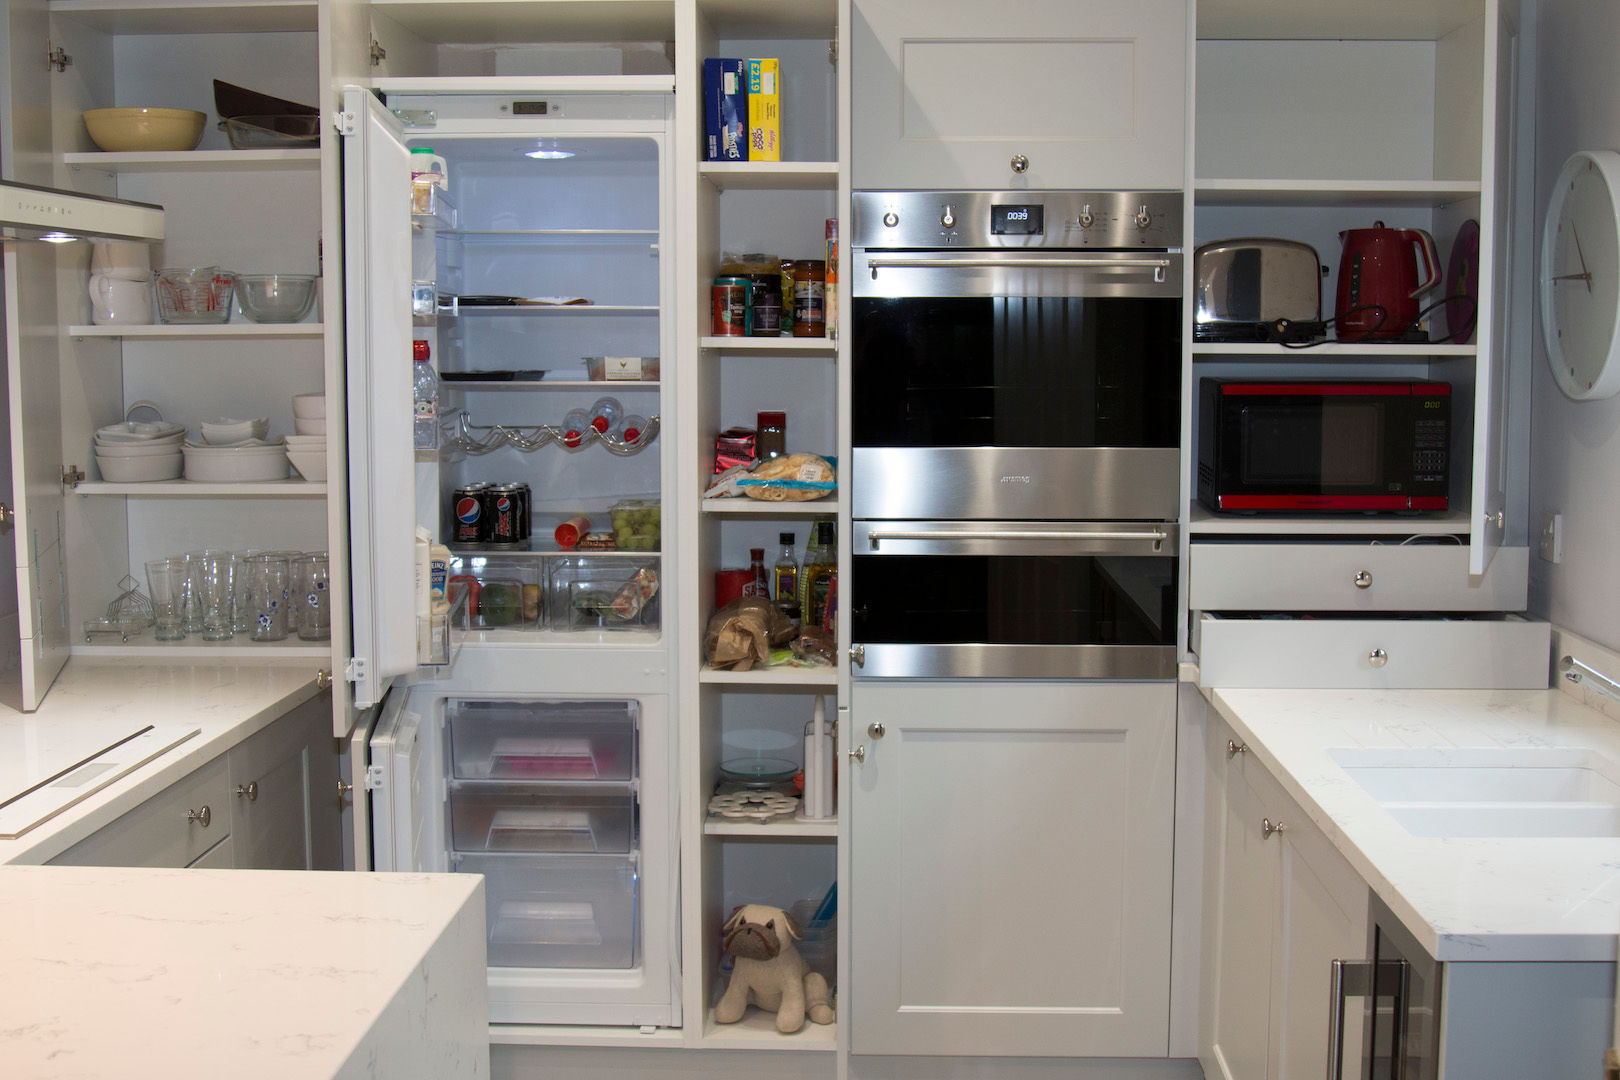 It's amazing how much storage you can have with an Appliance Wall homify Кухня в классическом стиле Дерево Эффект древесины grey kitchen,grey cupboards,appliance wall,kitchen storage,classic kitchen,contemporary kitchen,grey doors,SMEG